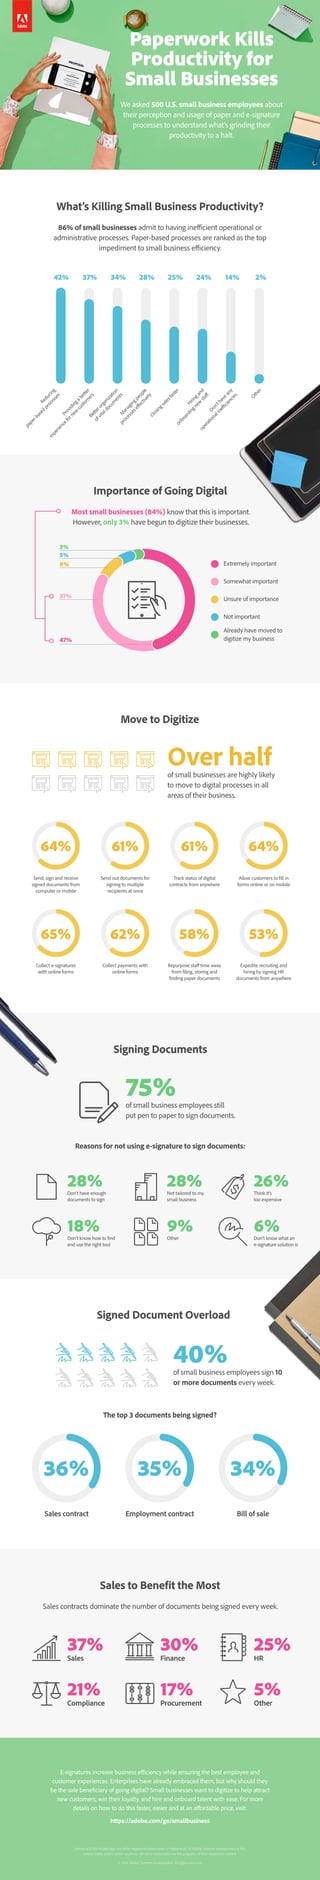 28%Don't have enough
documents to sign
28%Not tailored to my
small business
18%Don’t know how to find
and use the right tool
6%Don’t know what an
e-signature solution is
9%Other
75%of small business employees still
put pen to paper to sign documents.
Reasons for not using e-signature to sign documents:
Signing Documents
26%Think it’s
too expensive
What’s Killing Small Business Productivity?
86% of small businesses admit to having inefficient operational or
administrative processes. Paper-based processes are ranked as the top
impediment to small business efficiency.
Reducing
paper-based
processes
Providingabetter
experiencefornew
custom
ersBetterorganization
ofvitaldocum
entsM
anagingpeople
processeseffectively
Hiringand
onboardingnew
staff
Don’thaveany
operationalineffi
ciencies
Other
Closingsalesfaster
2%14%24%25%28%34%37%42%
Move to Digitize
Over halfof small businesses are highly likely
to move to digital processes in all
areas of their business.
Send, sign and receive
signed documents from
computer or mobile
Send out documents for
signing to multiple
recipients at once
Track status of digital
contracts from anywhere
Allow customers to fill in
forms online or on mobile
Collect e-signatures
with online forms
Collect payments with
online forms
Repurpose staff time away
from filing, storing and
finding paper documents
Expedite recruiting and
hiring by signing HR
documents from anywhere
53%58%62%65%
64%61%61%64%
3%
5%
8%
37%
47%
Importance of Going Digital
Most small businesses (84%) know that this is important.
However, only 3% have begun to digitize their businesses.
Extremely important
Somewhat important
Unsure of importance
Not important
Already have moved to
digitize my business
E-signatures increase business efficiency while ensuring the best employee and
customer experiences. Enterprises have already embraced them, but why should they
be the sole beneficiary of going digital? Small businesses want to digitize to help attract
new customers, win their loyalty, and hire and onboard talent with ease. For more
details on how to do this faster, easier and at an affordable price, visit:
https://adobe.com/go/smallbusiness
Adobe and the Adobe logo are either registered trademarks or trademarks of Adobe Systems Incorporated in the
United States and/or other countries. All other trademarks are the property of their respective owners.
© 2019 Adobe Systems Incorporated. All rights reserved.
37%
Sales
Sales to Benefit the Most
Sales contracts dominate the number of documents being signed every week.
30%
Finance
25%
HR
21%
Compliance
17%
Procurement
5%
Other
Paperwork Kills
Productivity for
Small Businesses
We asked 500 U.S. small business employees about
their perception and usage of paper and e-signature
processes to understand what’s grinding their
productivity to a halt.
Signed Document Overload
The top 3 documents being signed?
40%of small business employees sign 10
or more documents every week.
Sales contract Employment contract Bill of sale
36% 35% 34%
 